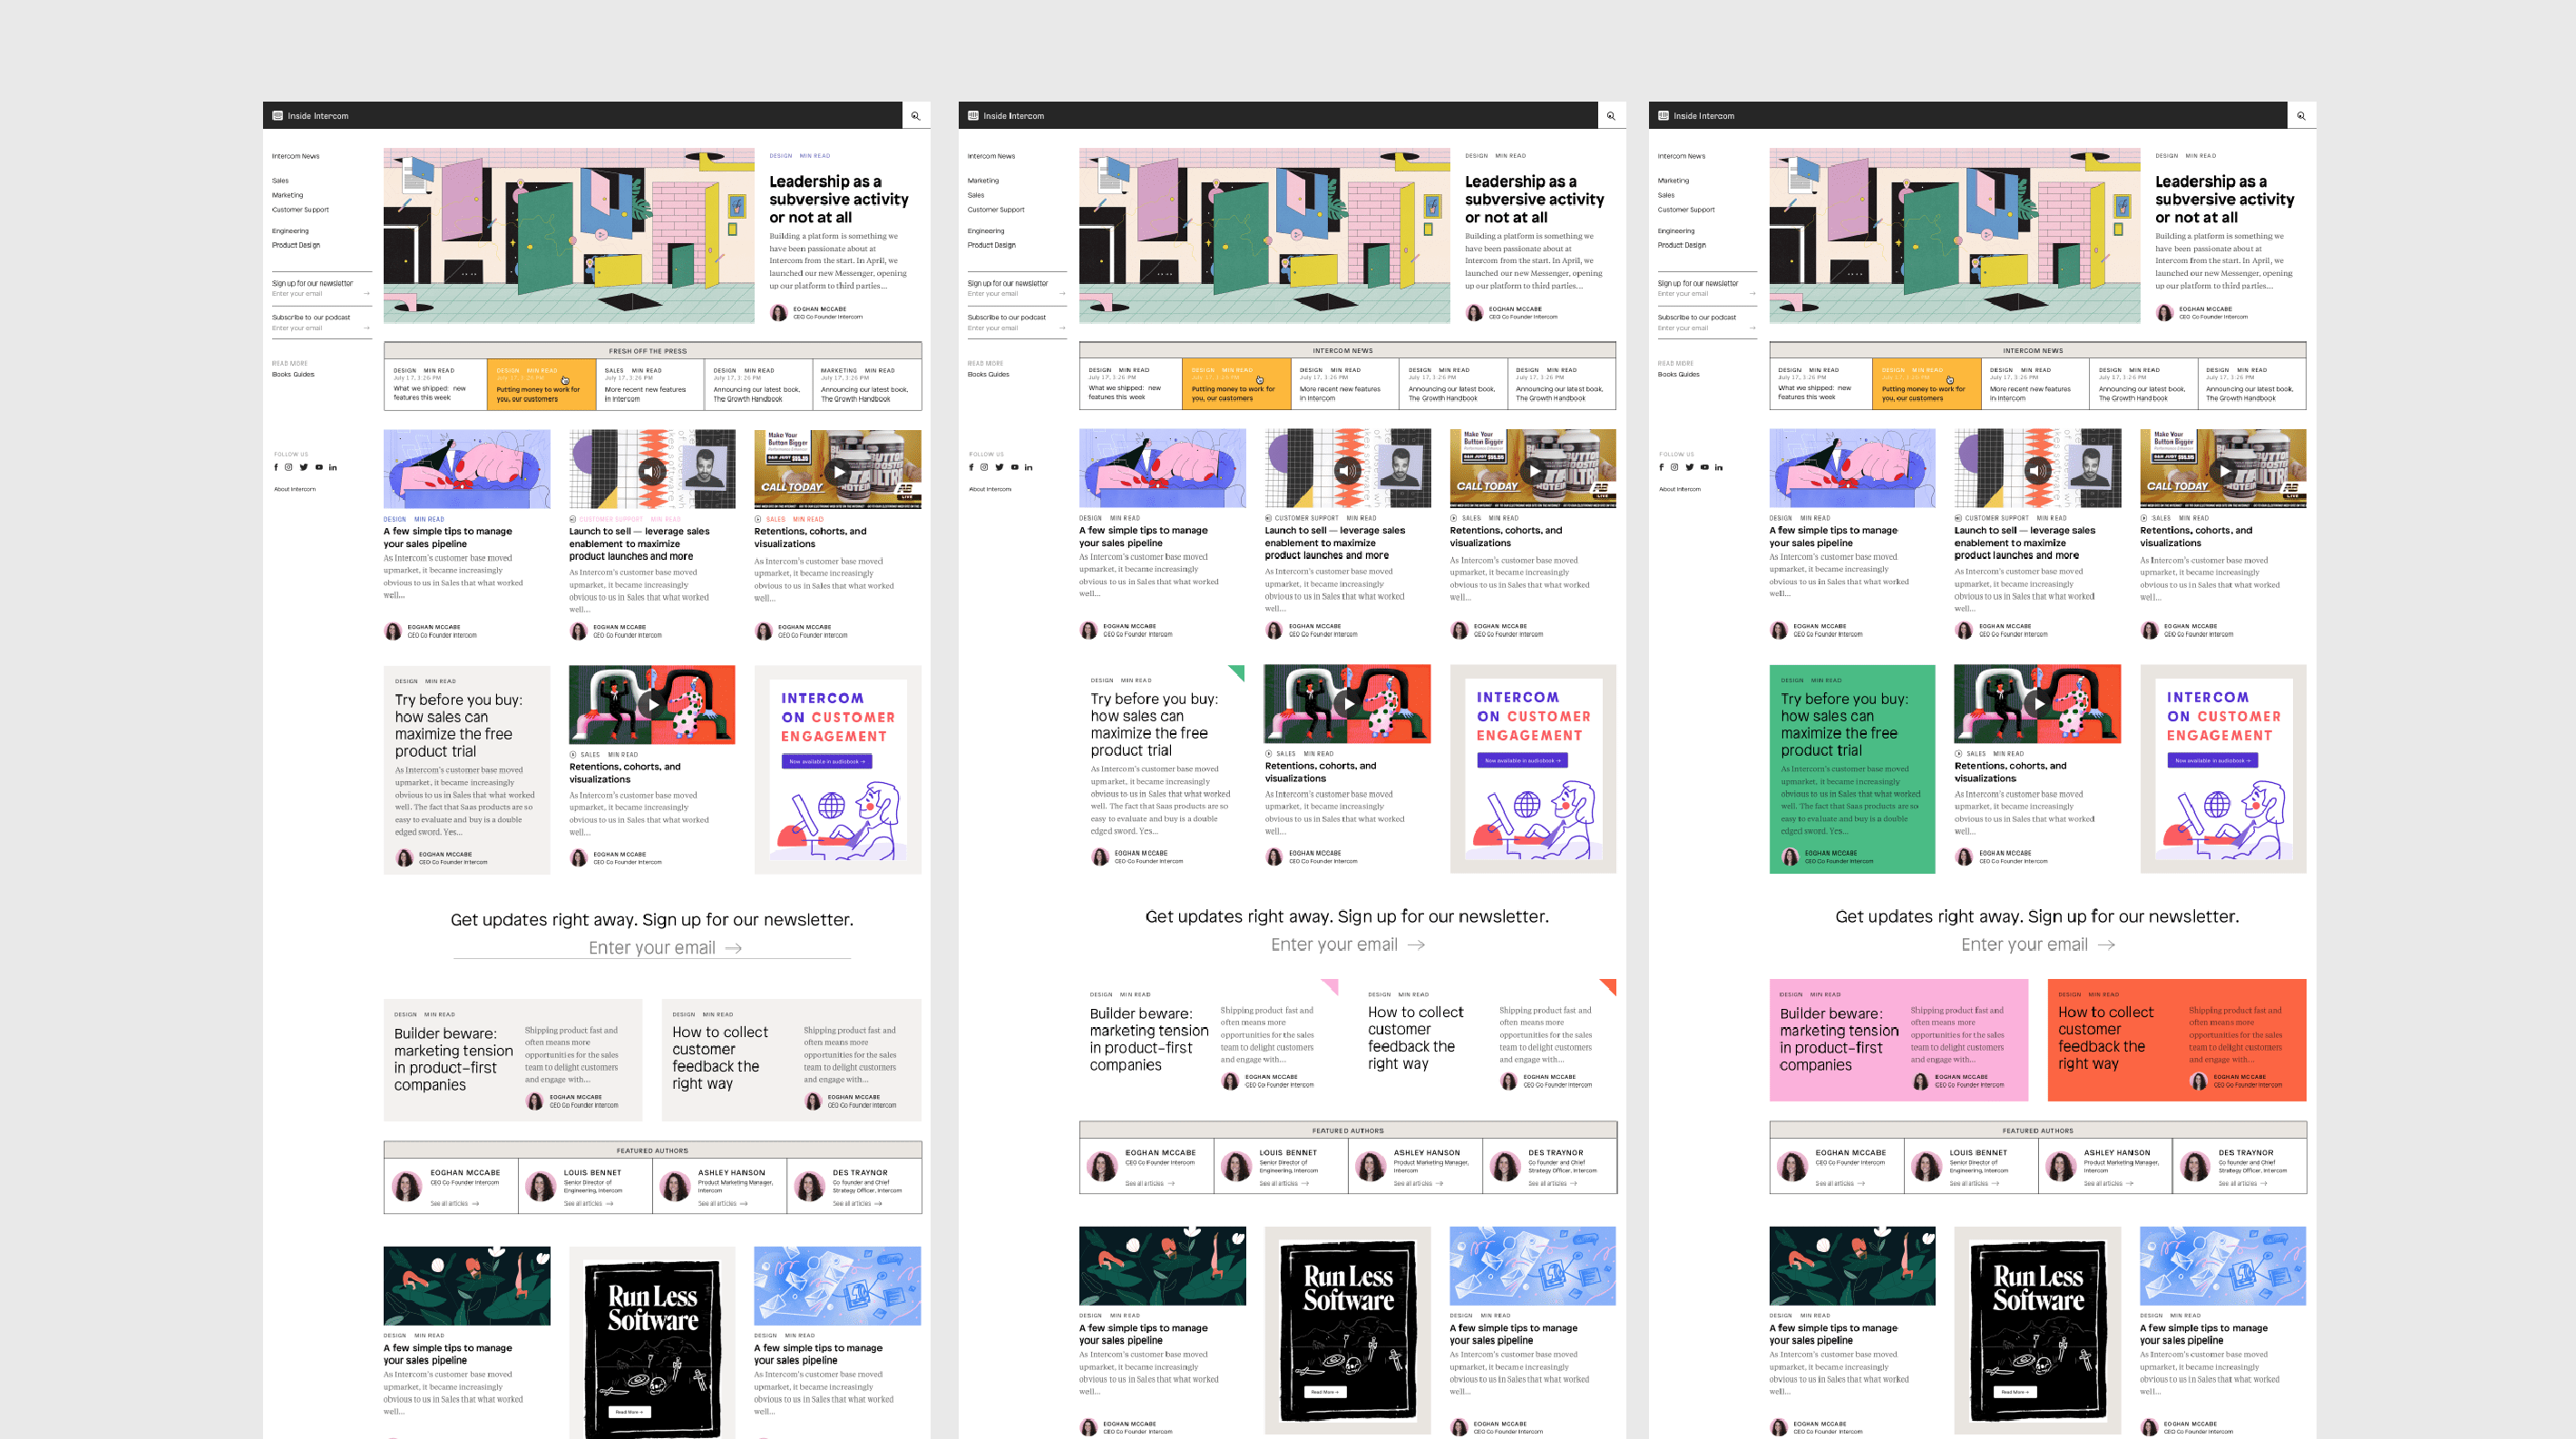 Explorations of the homepage design